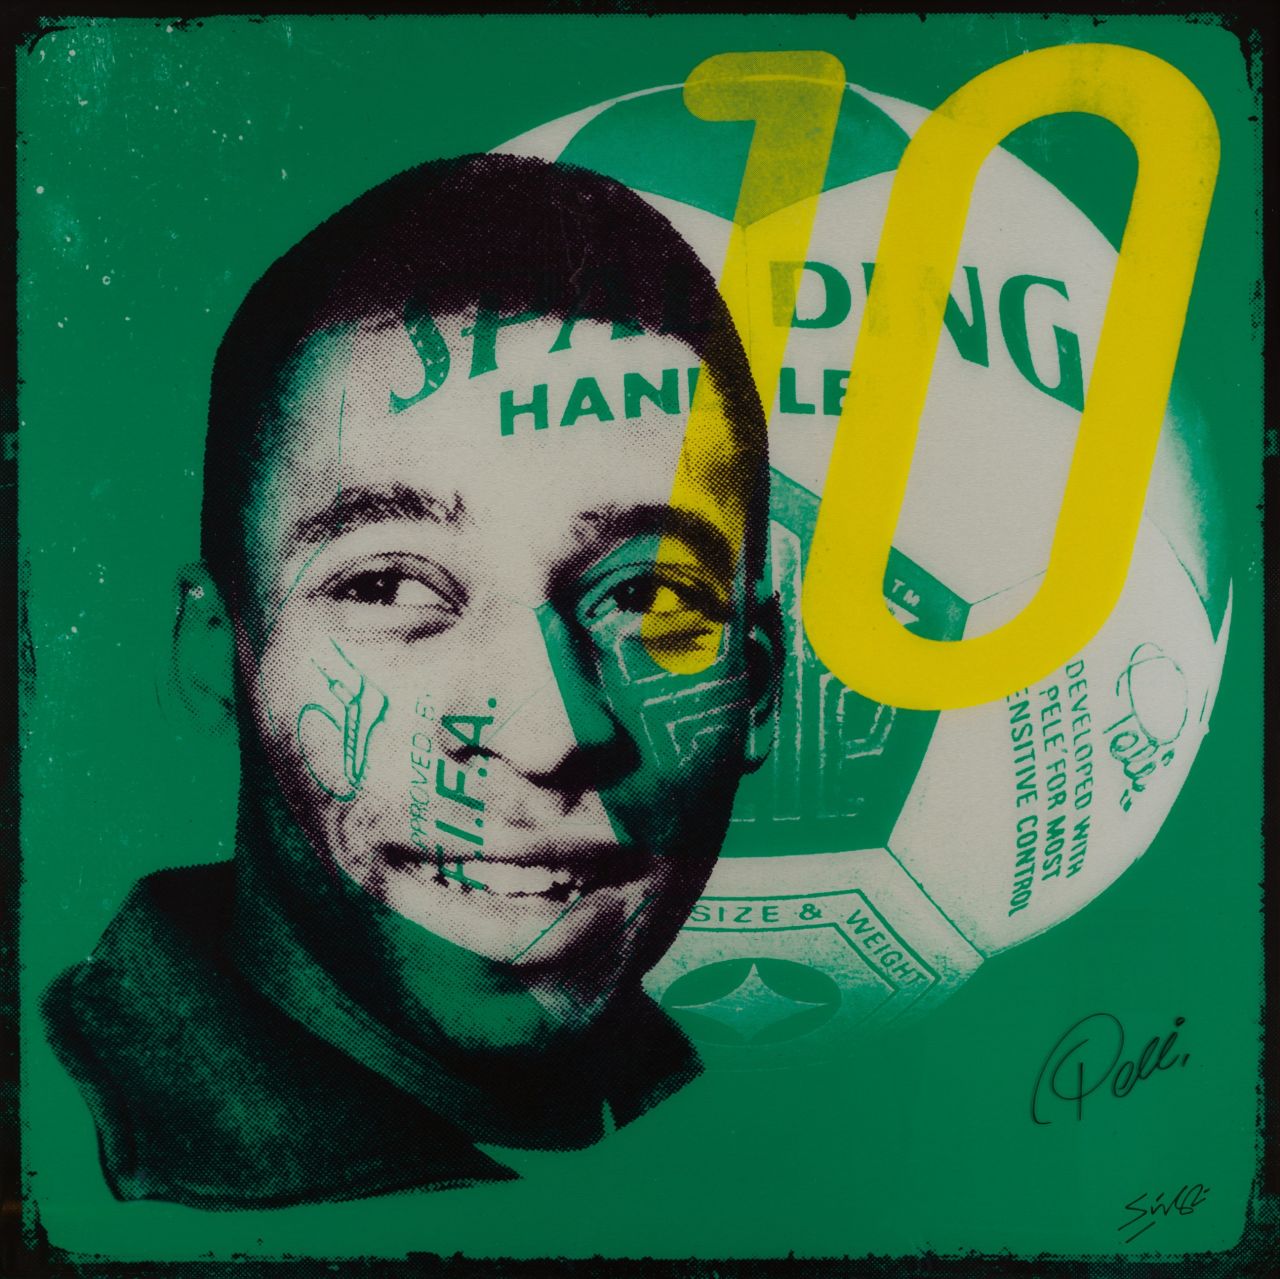 Loius Sidoli's work is named after Warhol's famous quote about Pele. The artist revisited his "15 minutes of fame" quote to predict "15 centuries" of acclaim for the Brazilian, such was his talent.